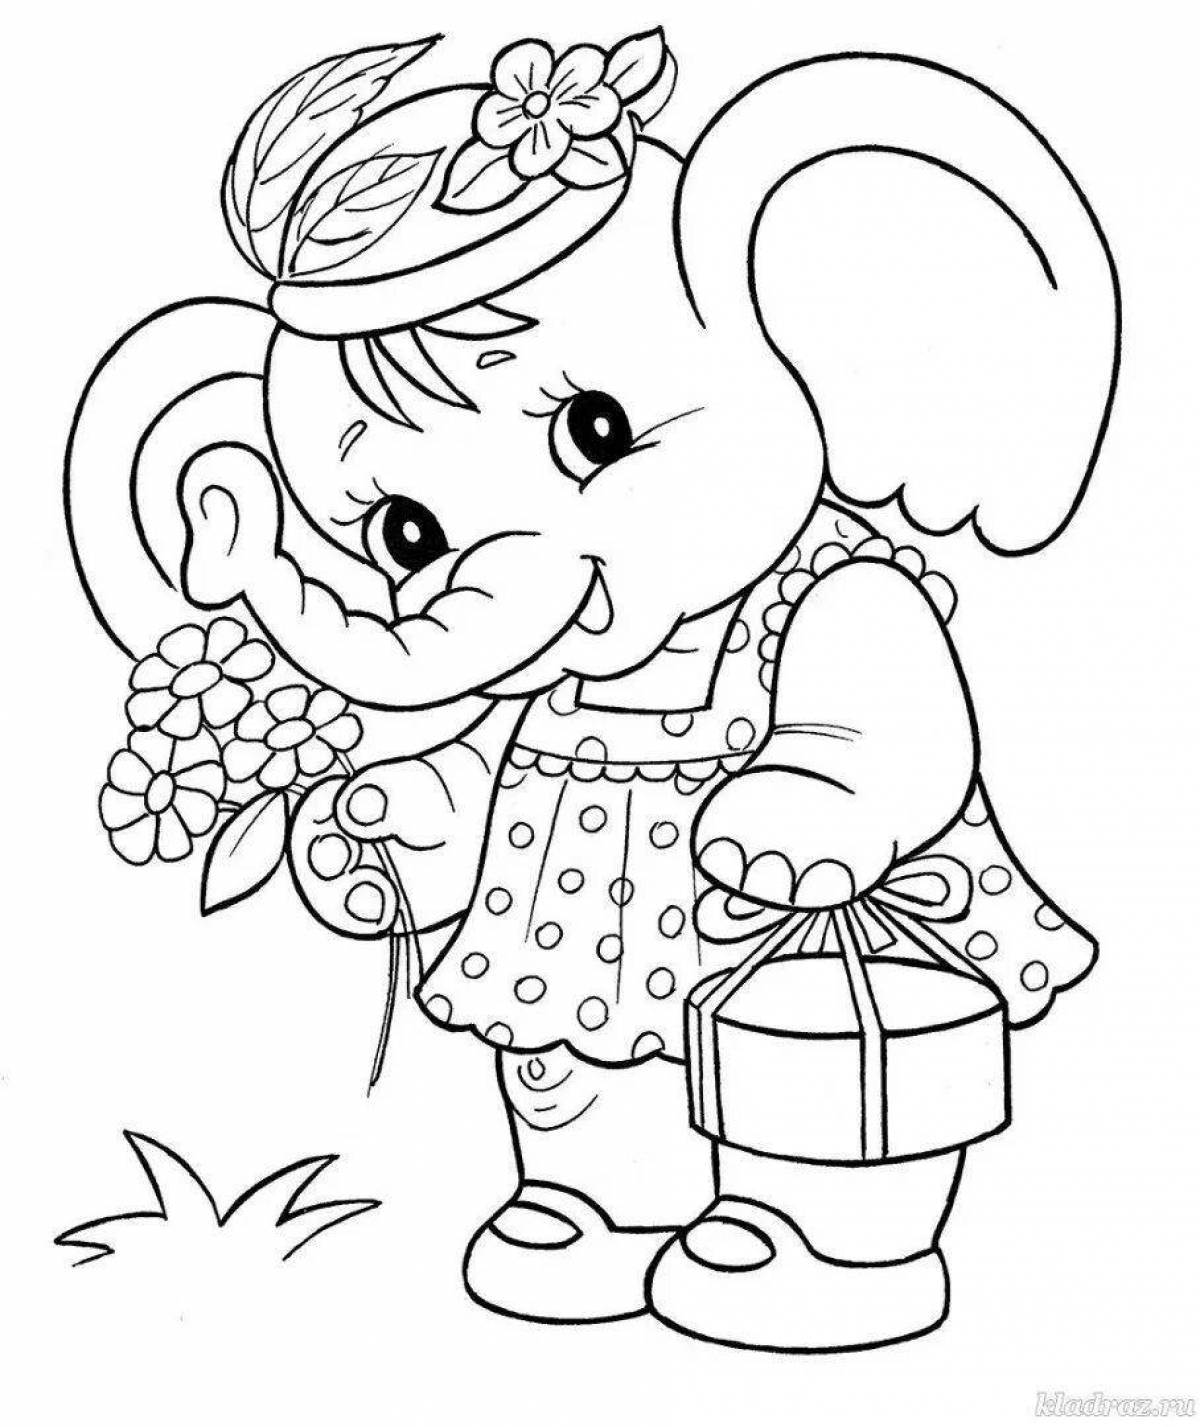 A fascinating children's coloring book download